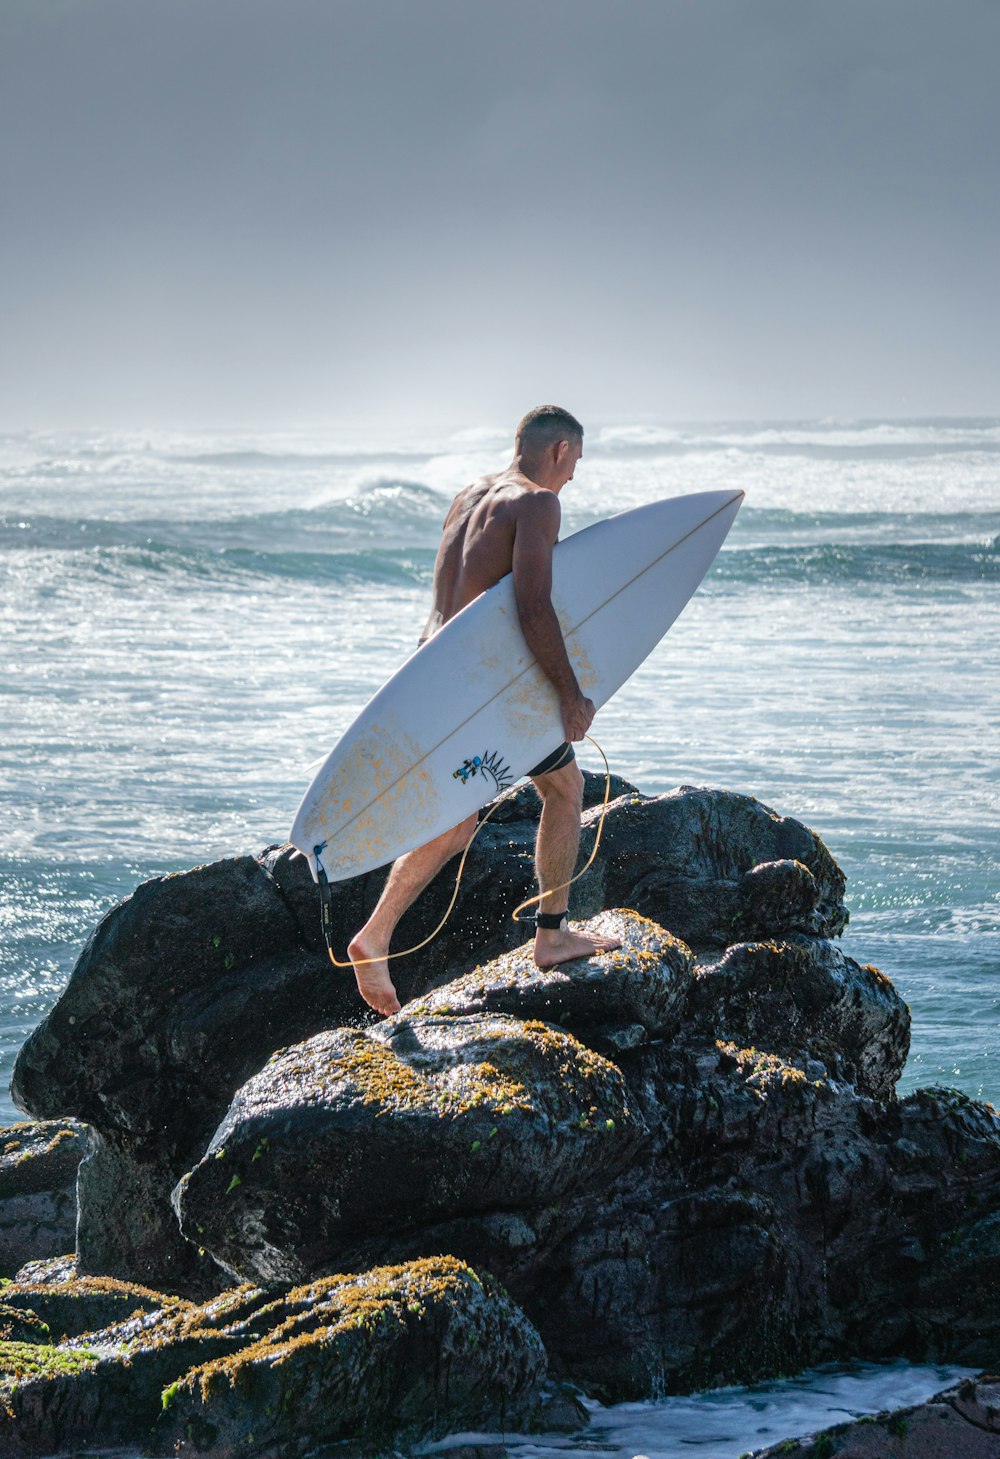 a man carrying a surfboard on top of a rocky beach